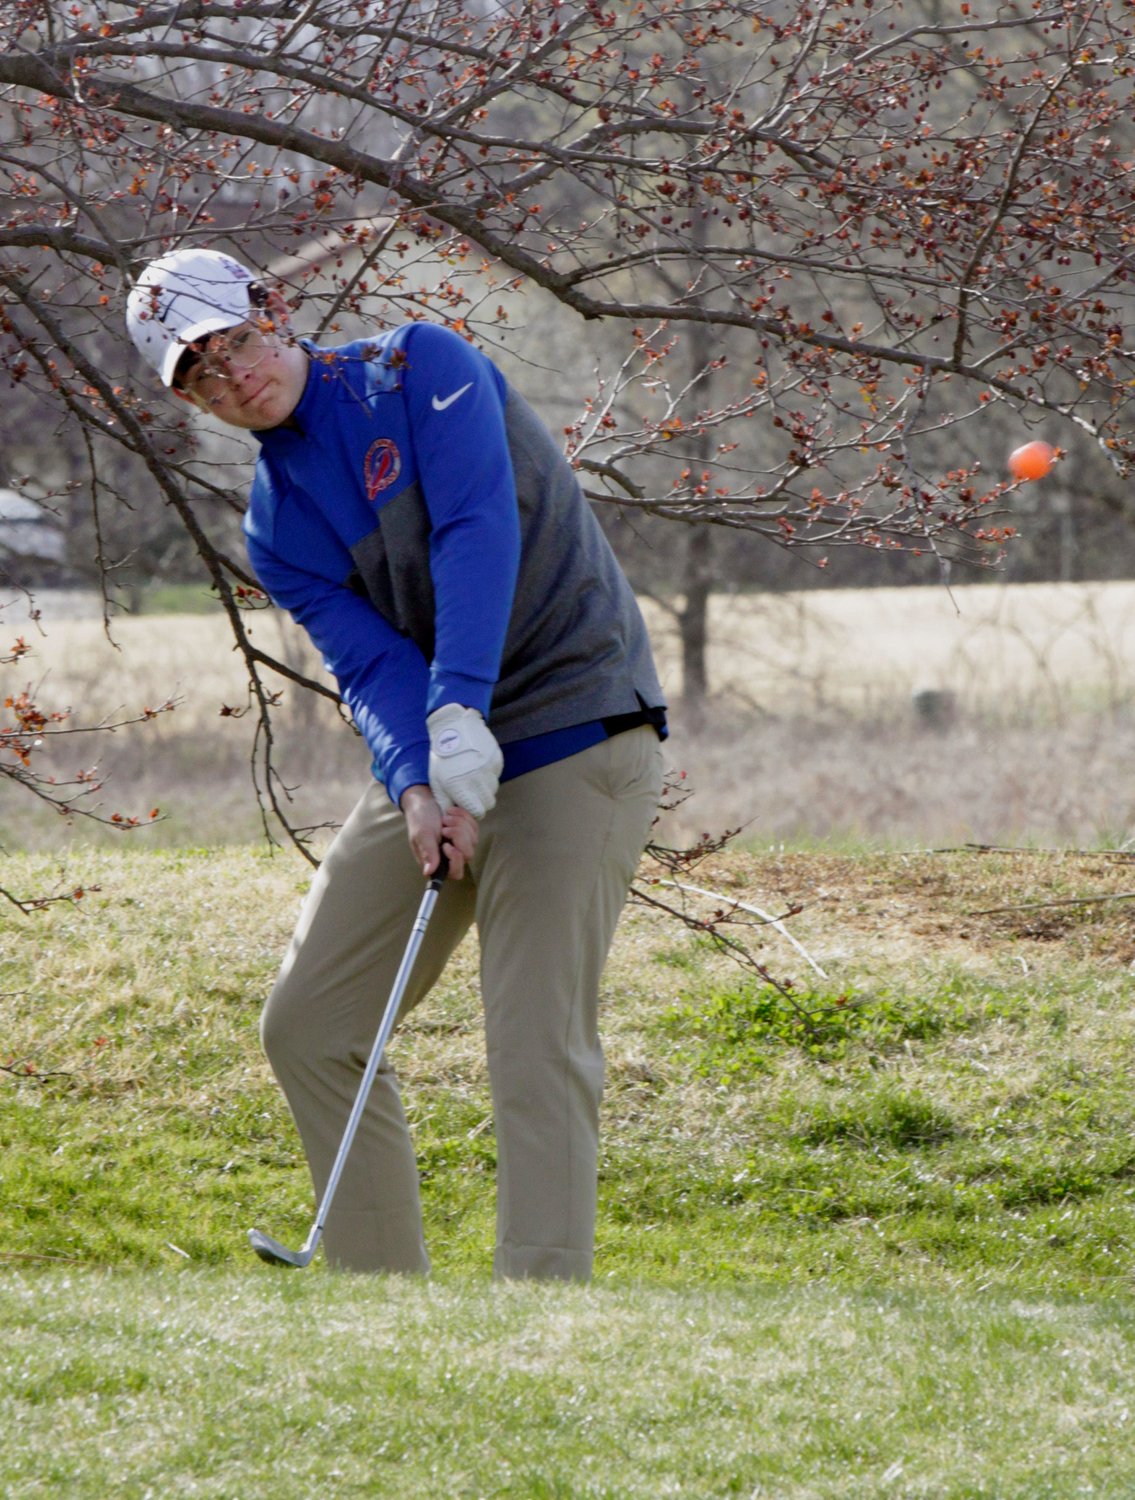 Moberly High School freshman Chase Nelson stands between tree limbs as he places his chip shot toward the green on hole no. 13 Tuesday at Heritage Hills Golf Course. Nelson turned in a score of 62 while playing the back nine holes, and the Spartans team lost its home dual to Boonville 234-245.